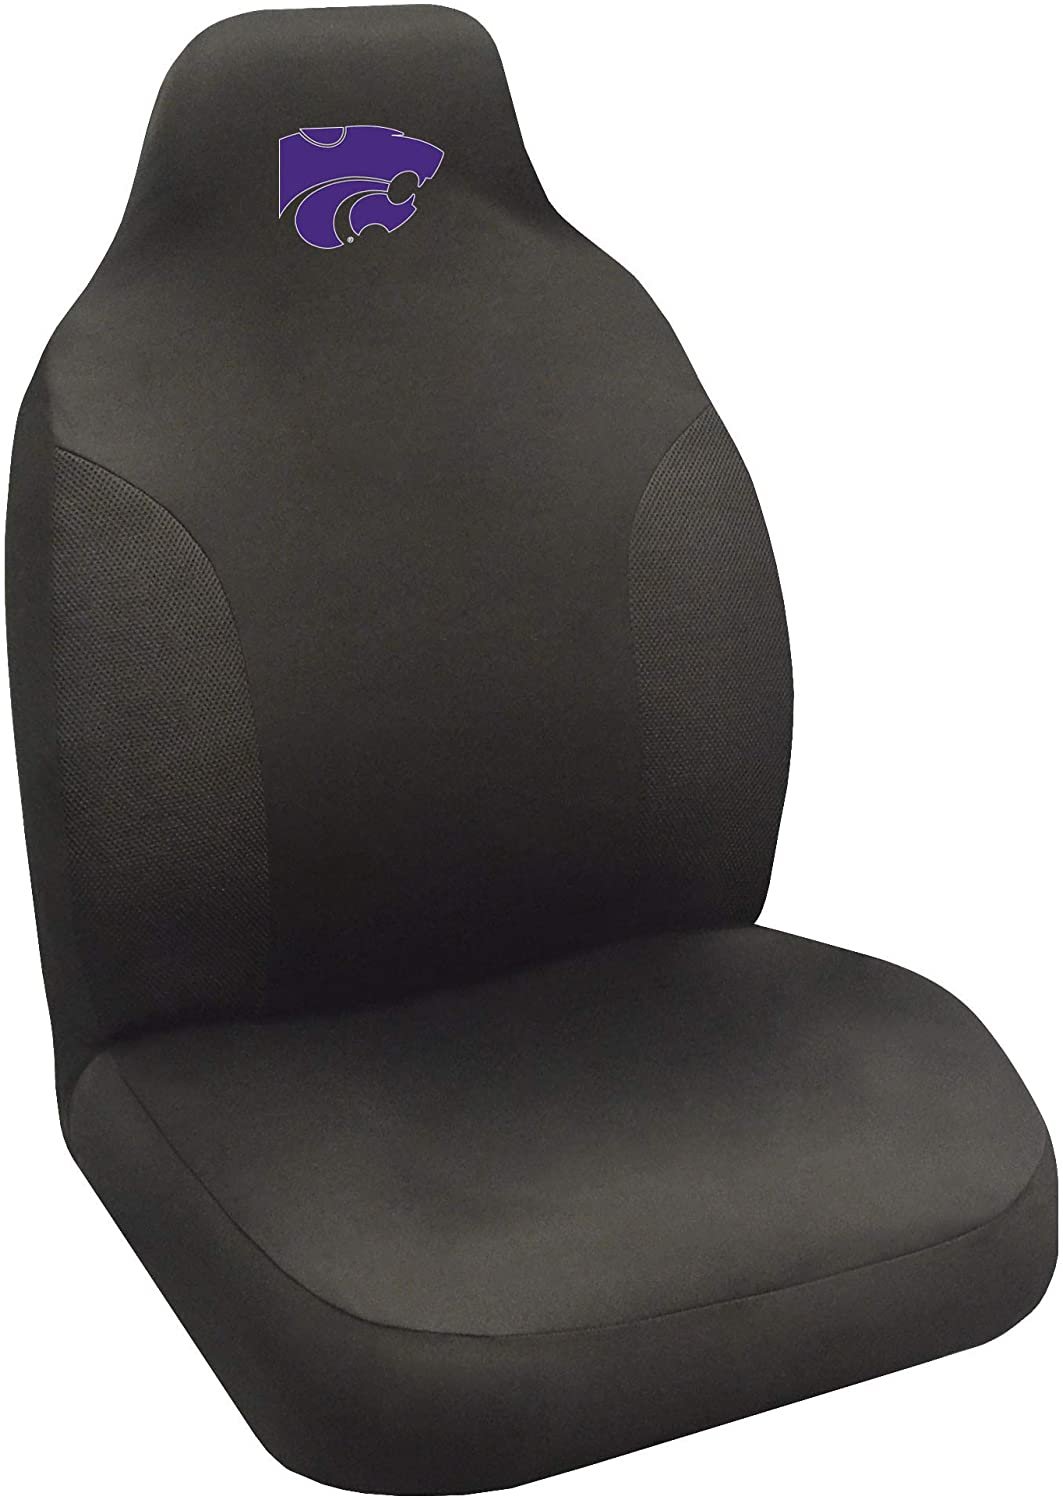 Kansas State Wildcats Bucket Auto Seat Cover 48x20 Inch Elastic